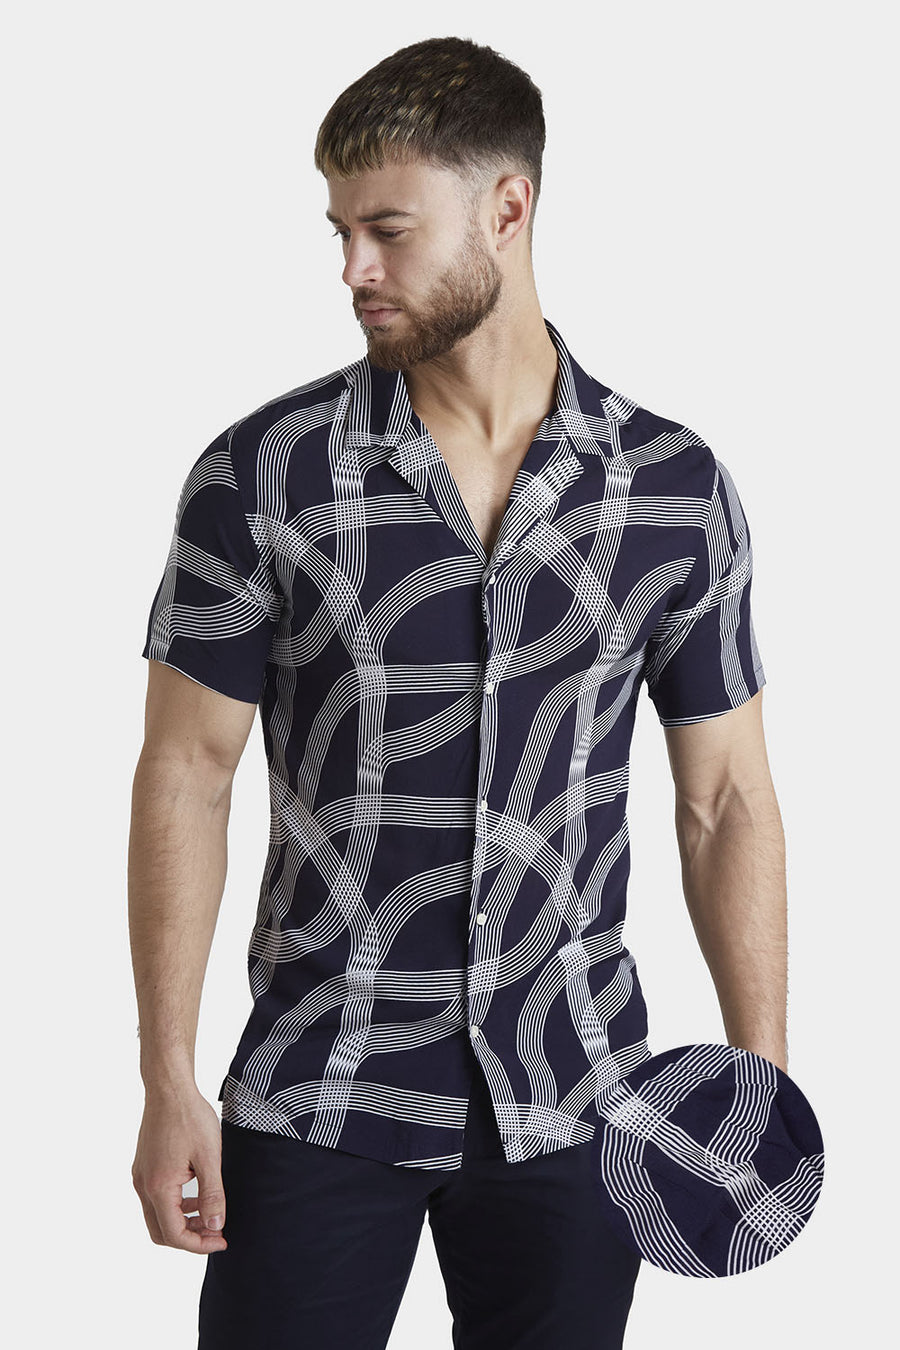 Printed Shirt in Navy Curved Stripe - TAILORED ATHLETE - USA